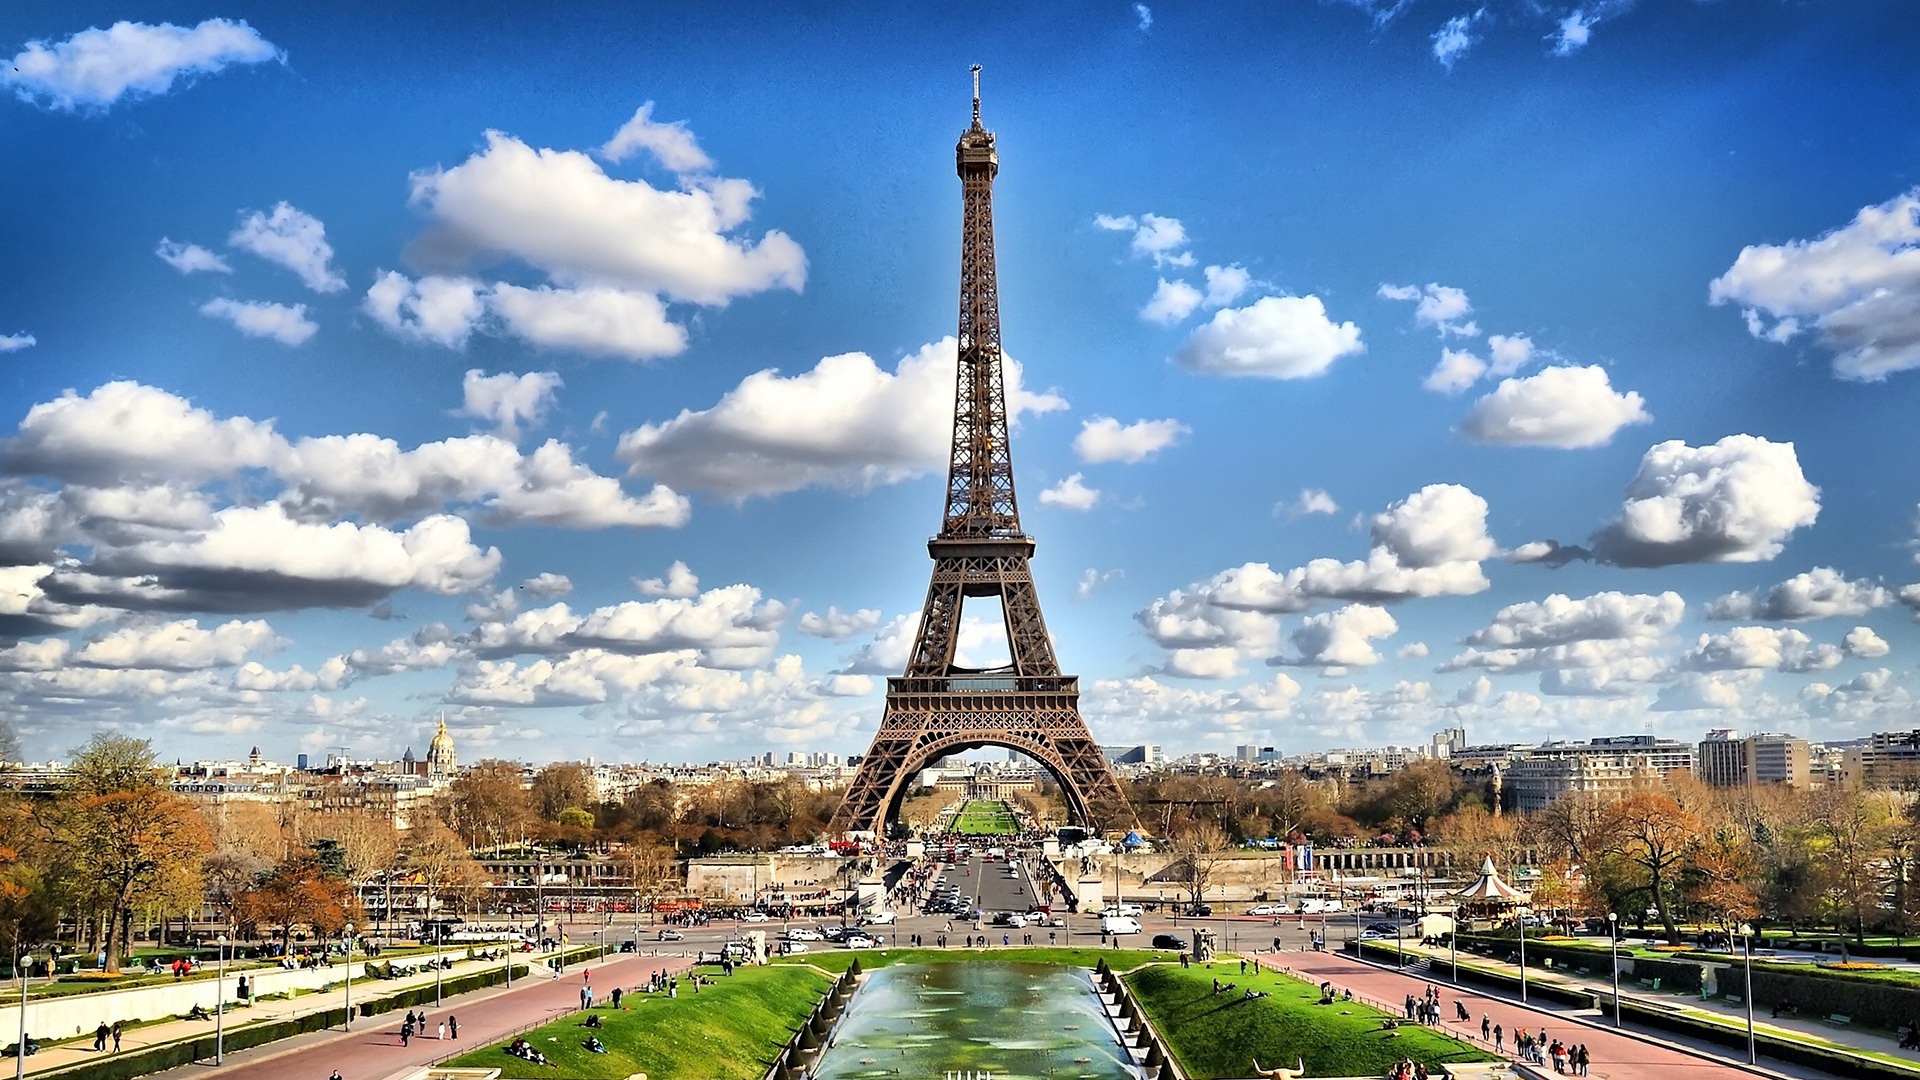 Eiffel tower on background of clouds in Paris France wallpapers and